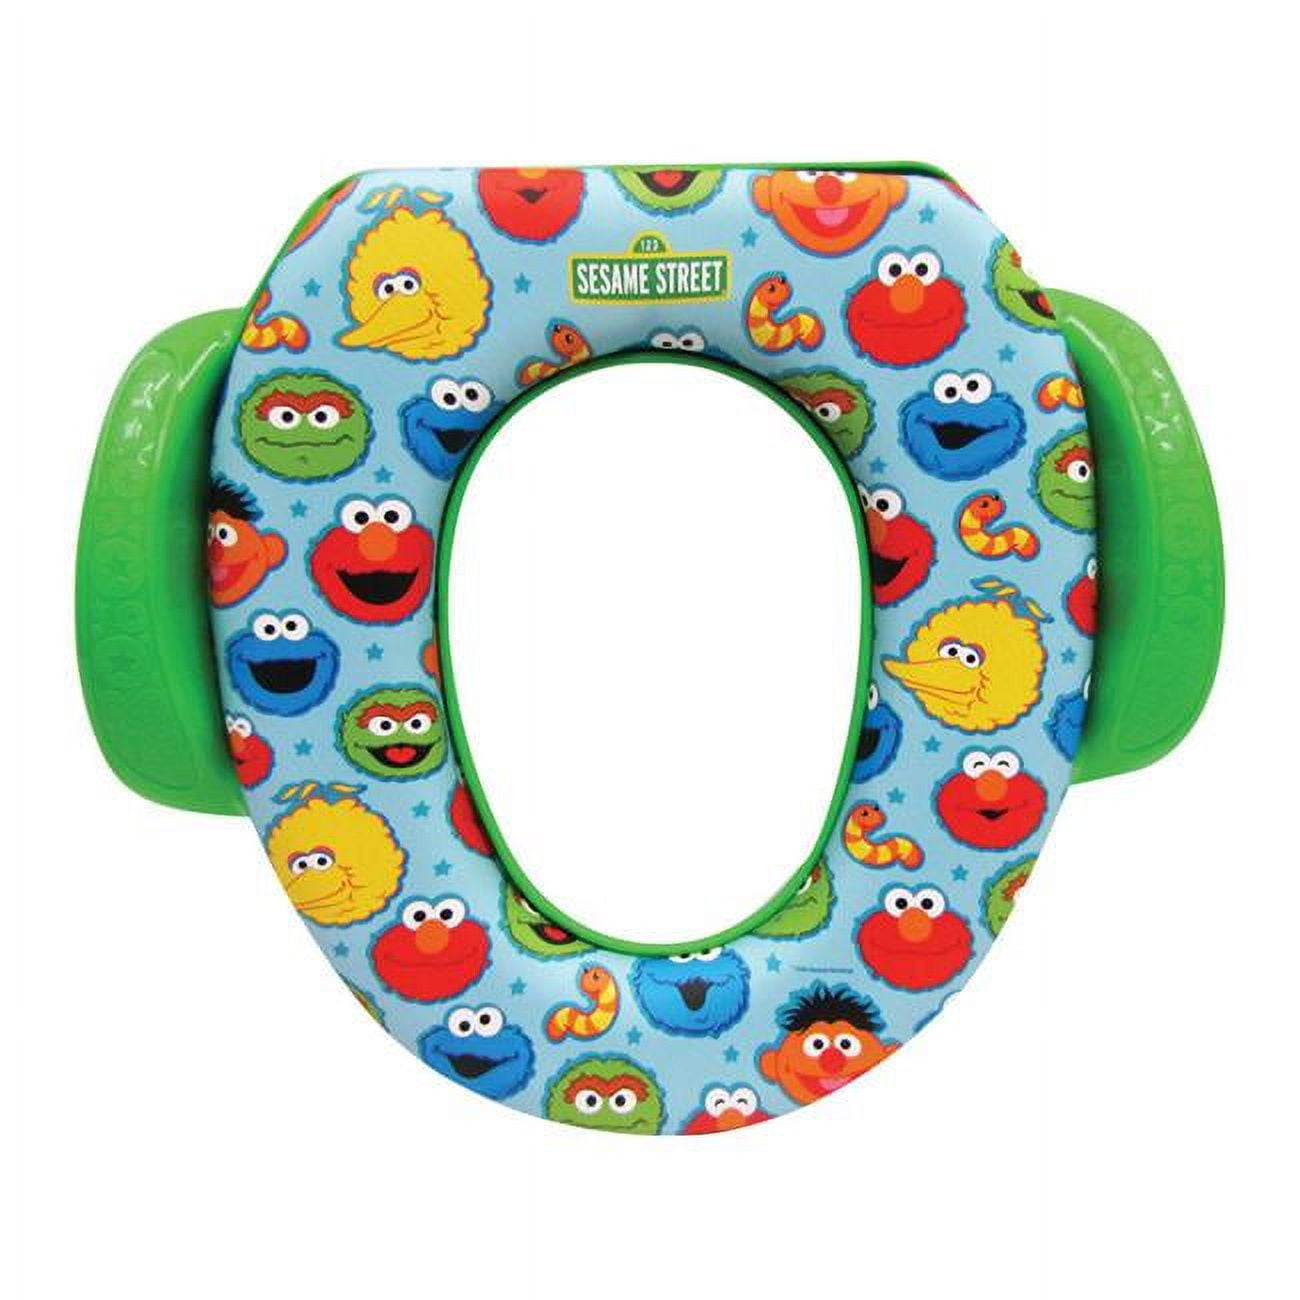 Picture of Sesame Street 4908323 Sesame Street Best Pals Round Soft Childs Toilet Seat